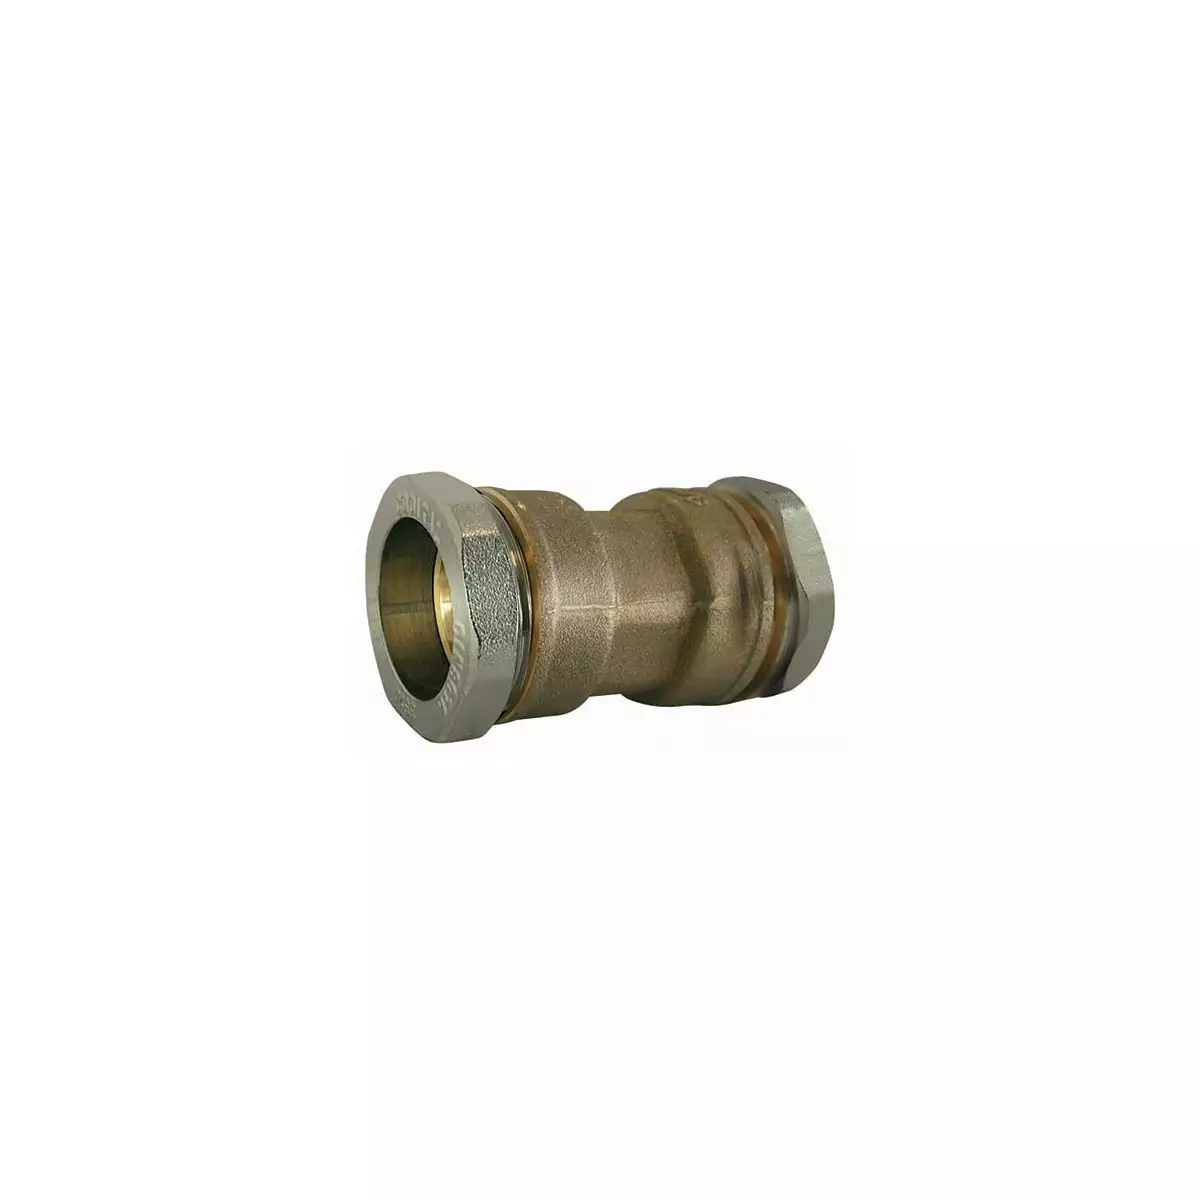 Brass compression coupling sleeve for PE pipe to steel pipe dimensions